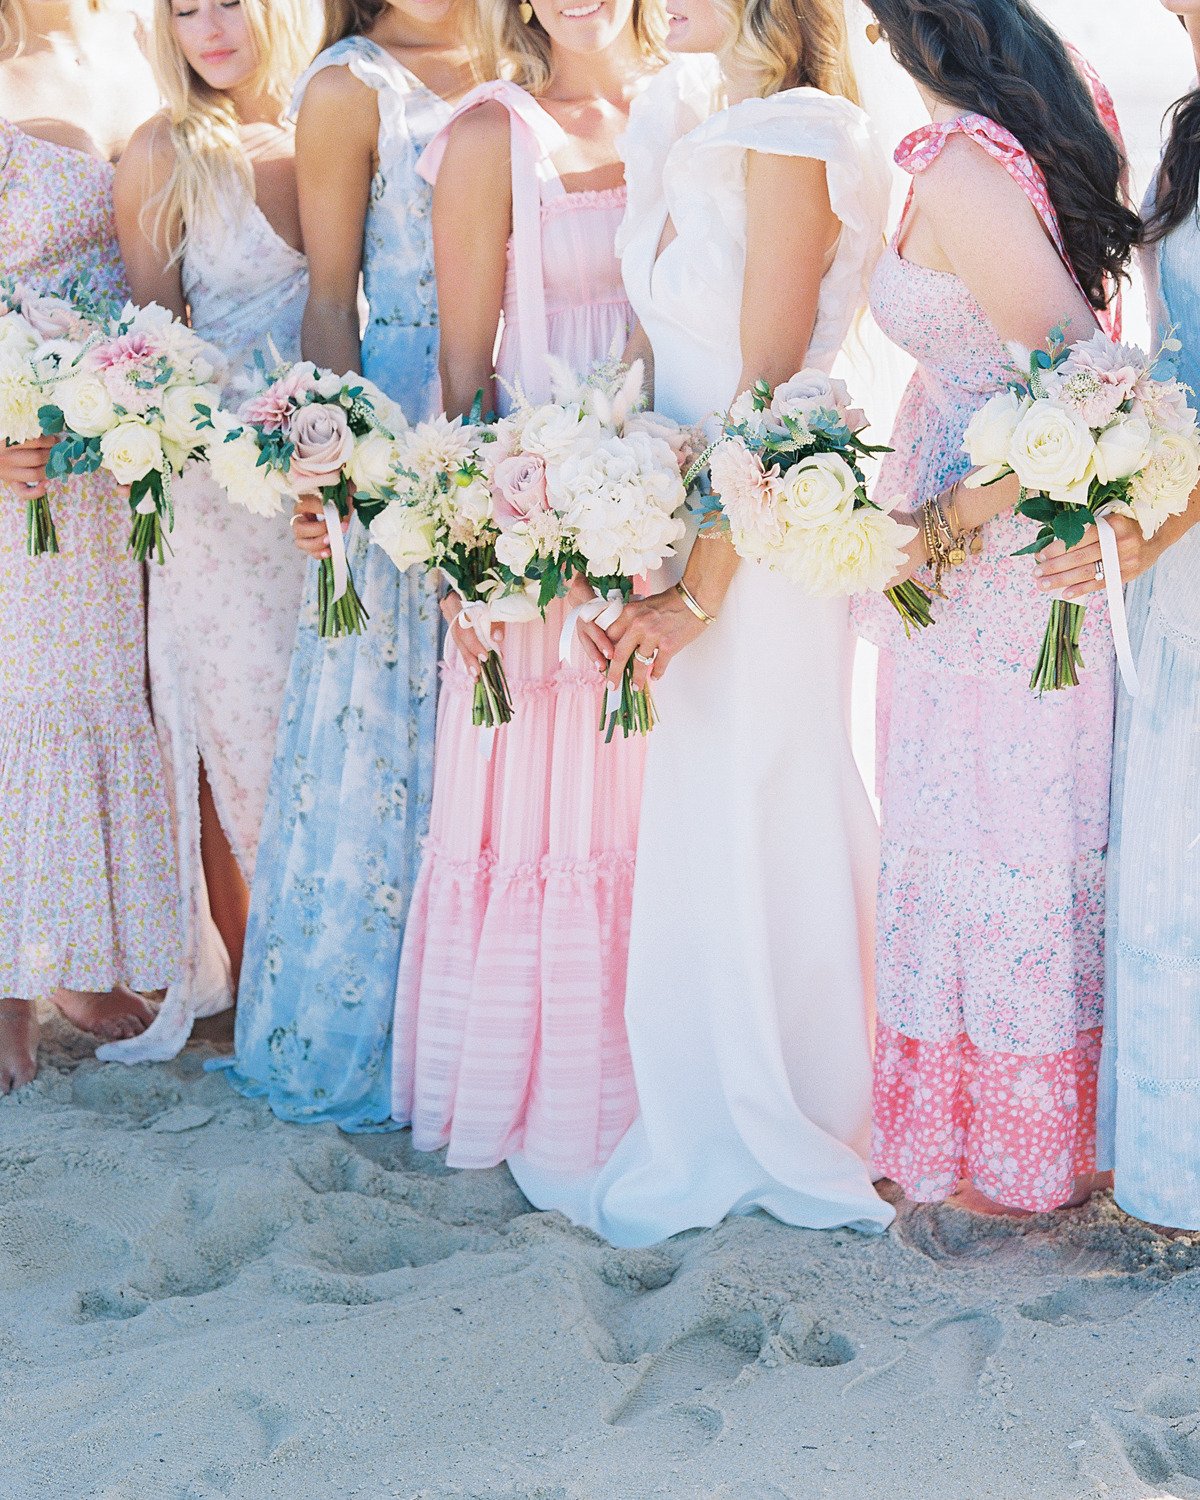 Bridesmaids loveshackfancy dresses and bouquets